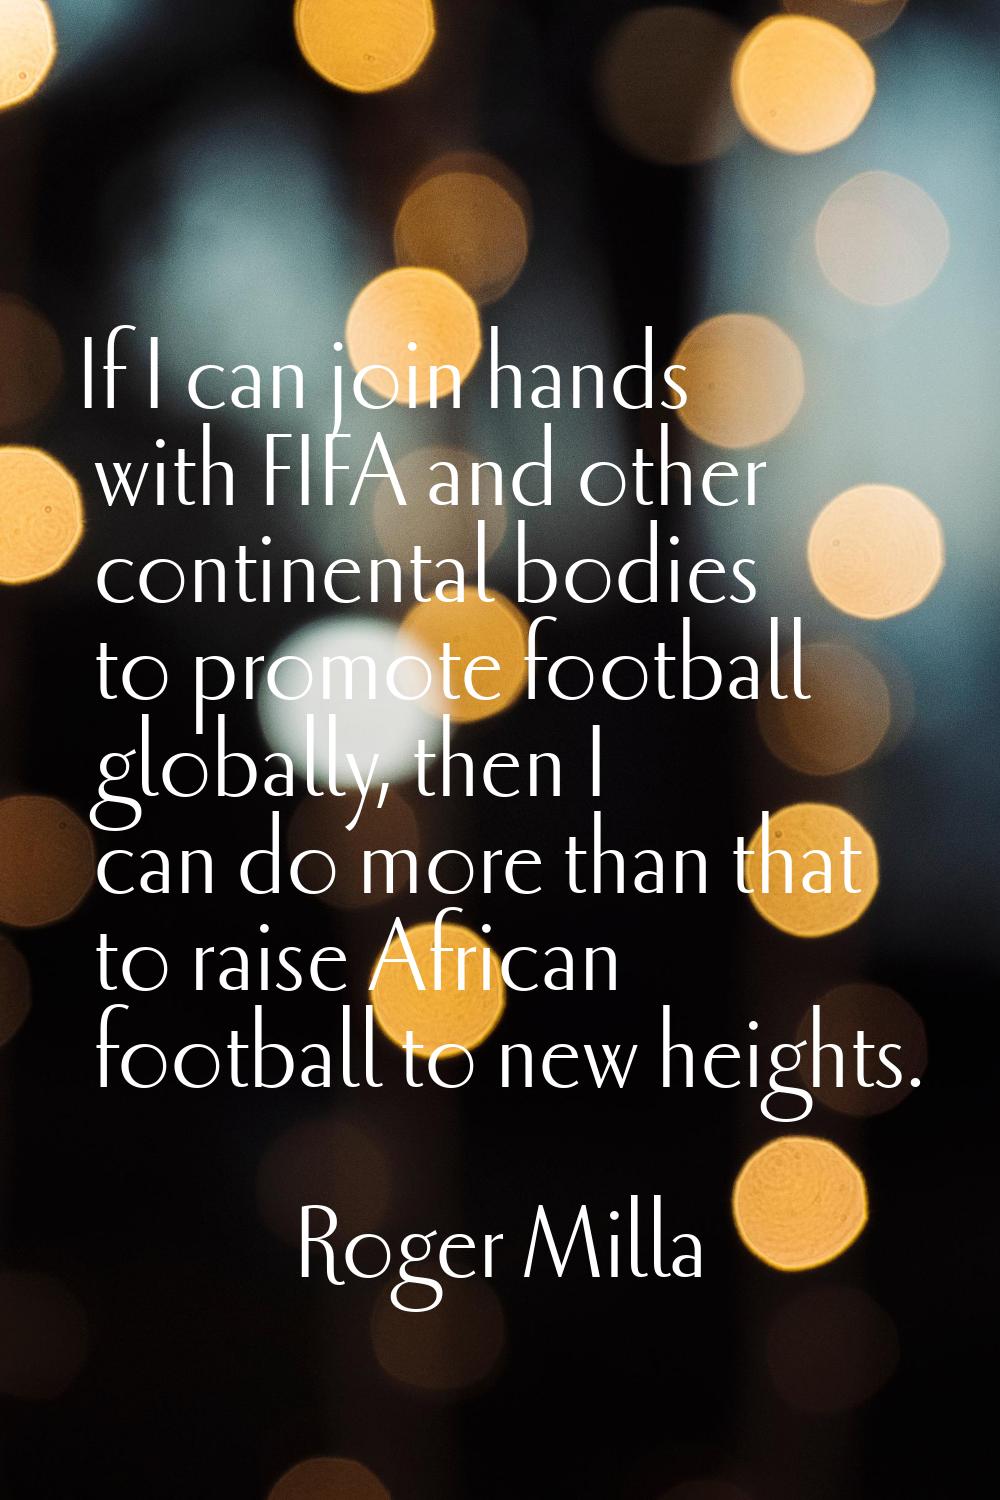 If I can join hands with FIFA and other continental bodies to promote football globally, then I can